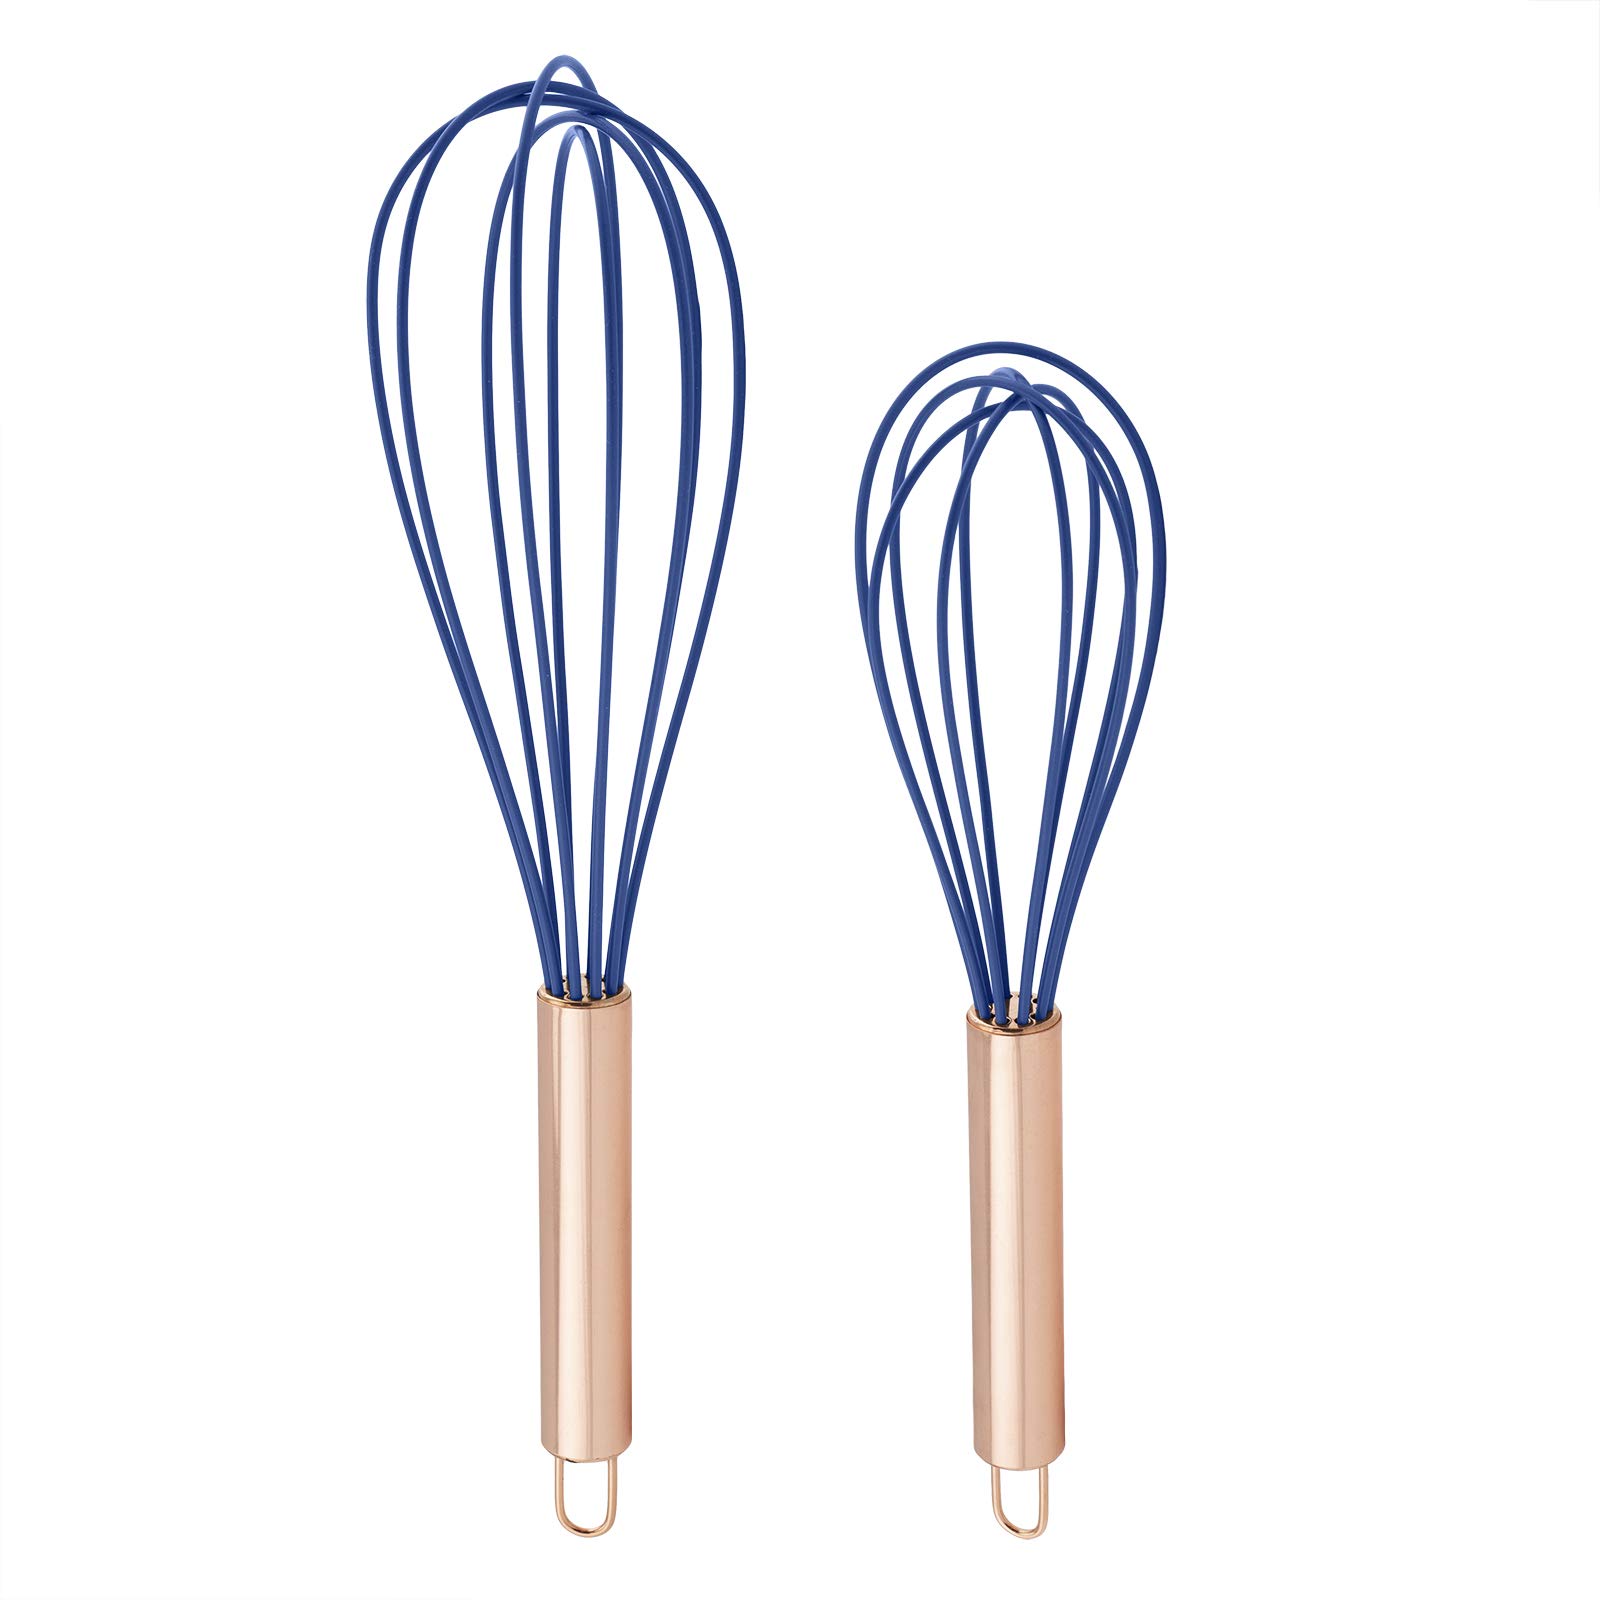 cOOK WITH cOLOR Silicone Whisks for cooking, Stainless Steel Wire Whisk Set of Two - 10A and 12A, Heat Resistant Kitchen Whisks,